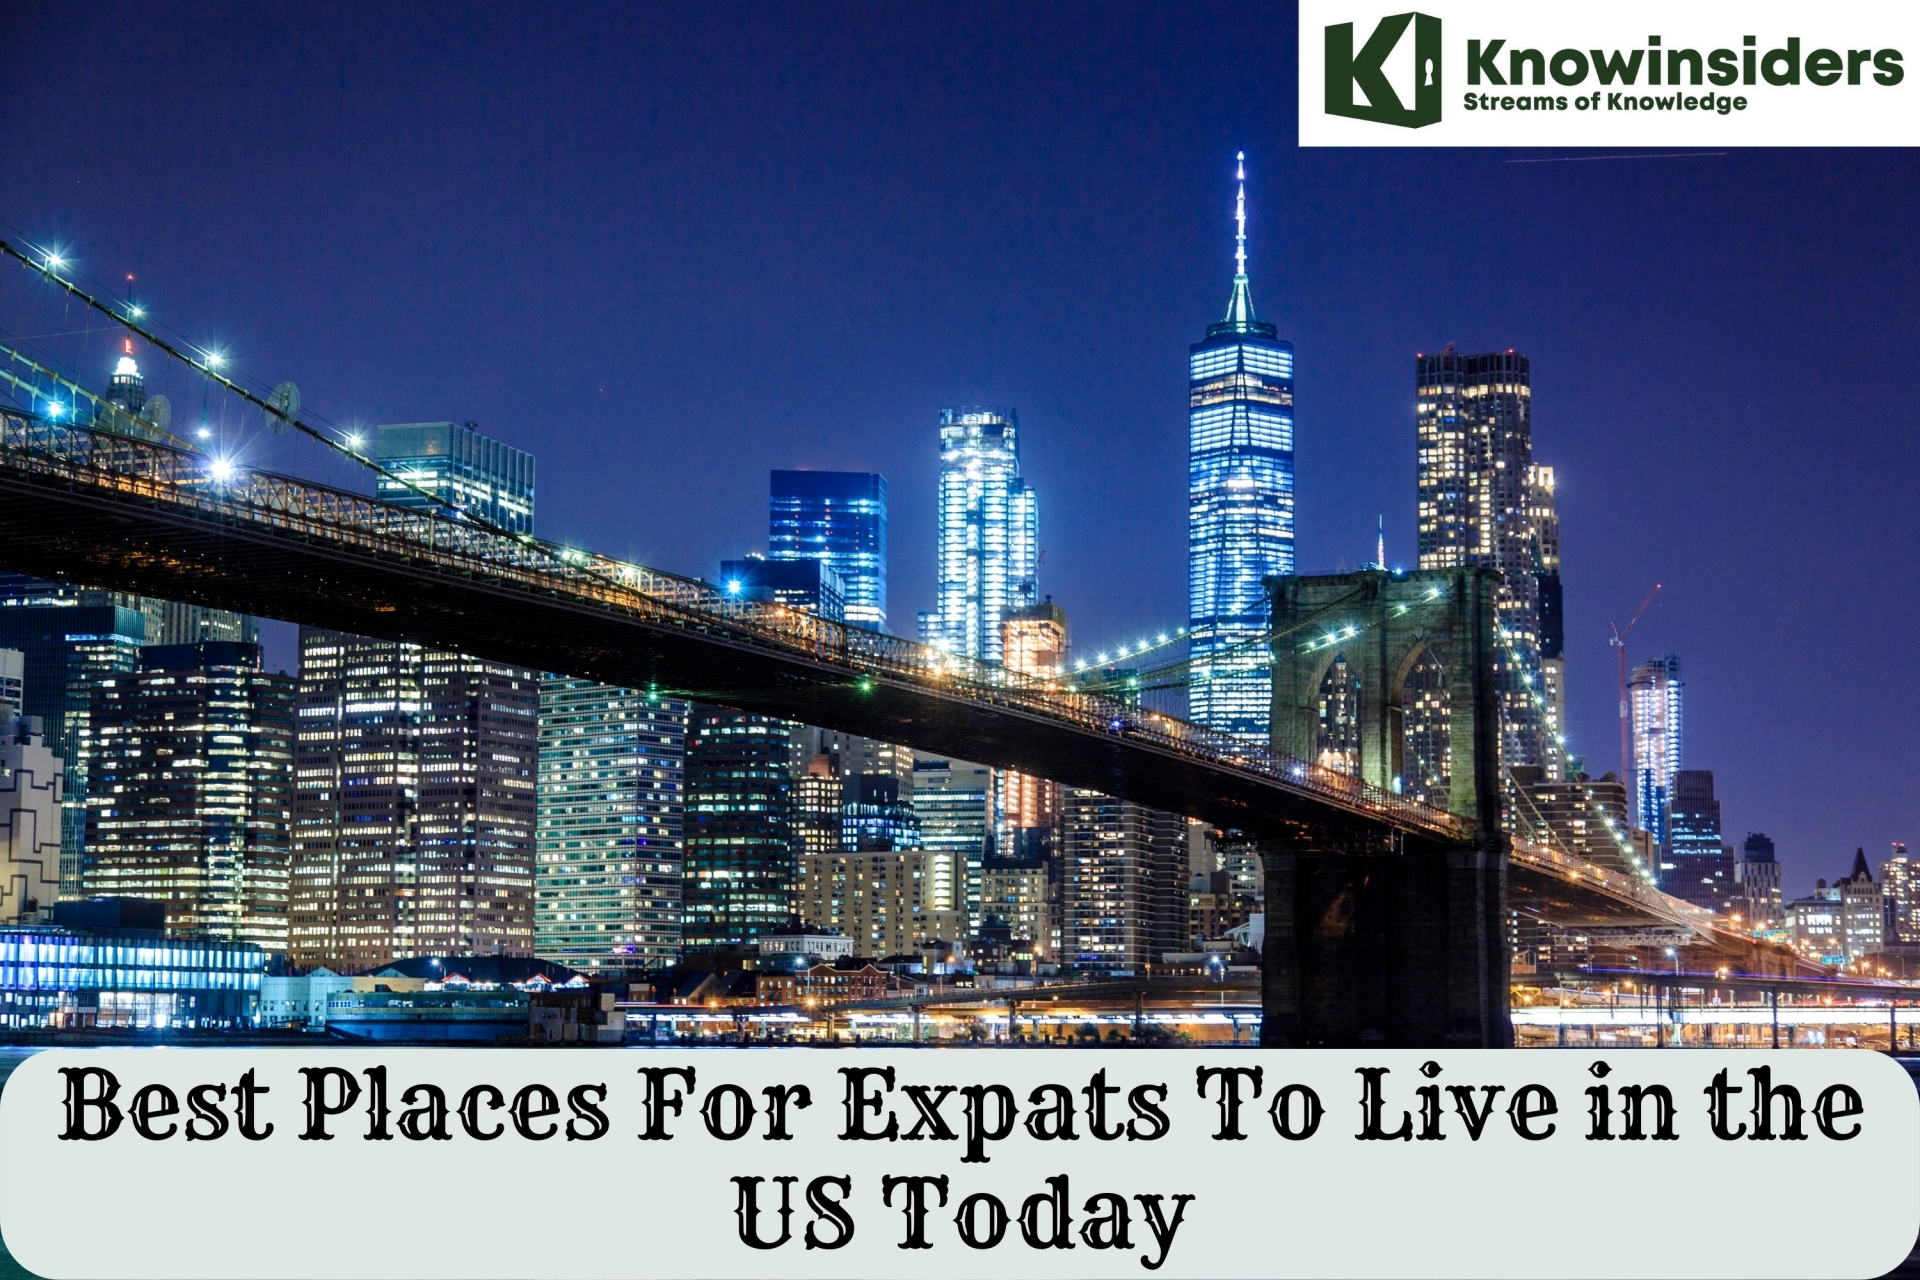 Best Places For Expats To Live in the US Today